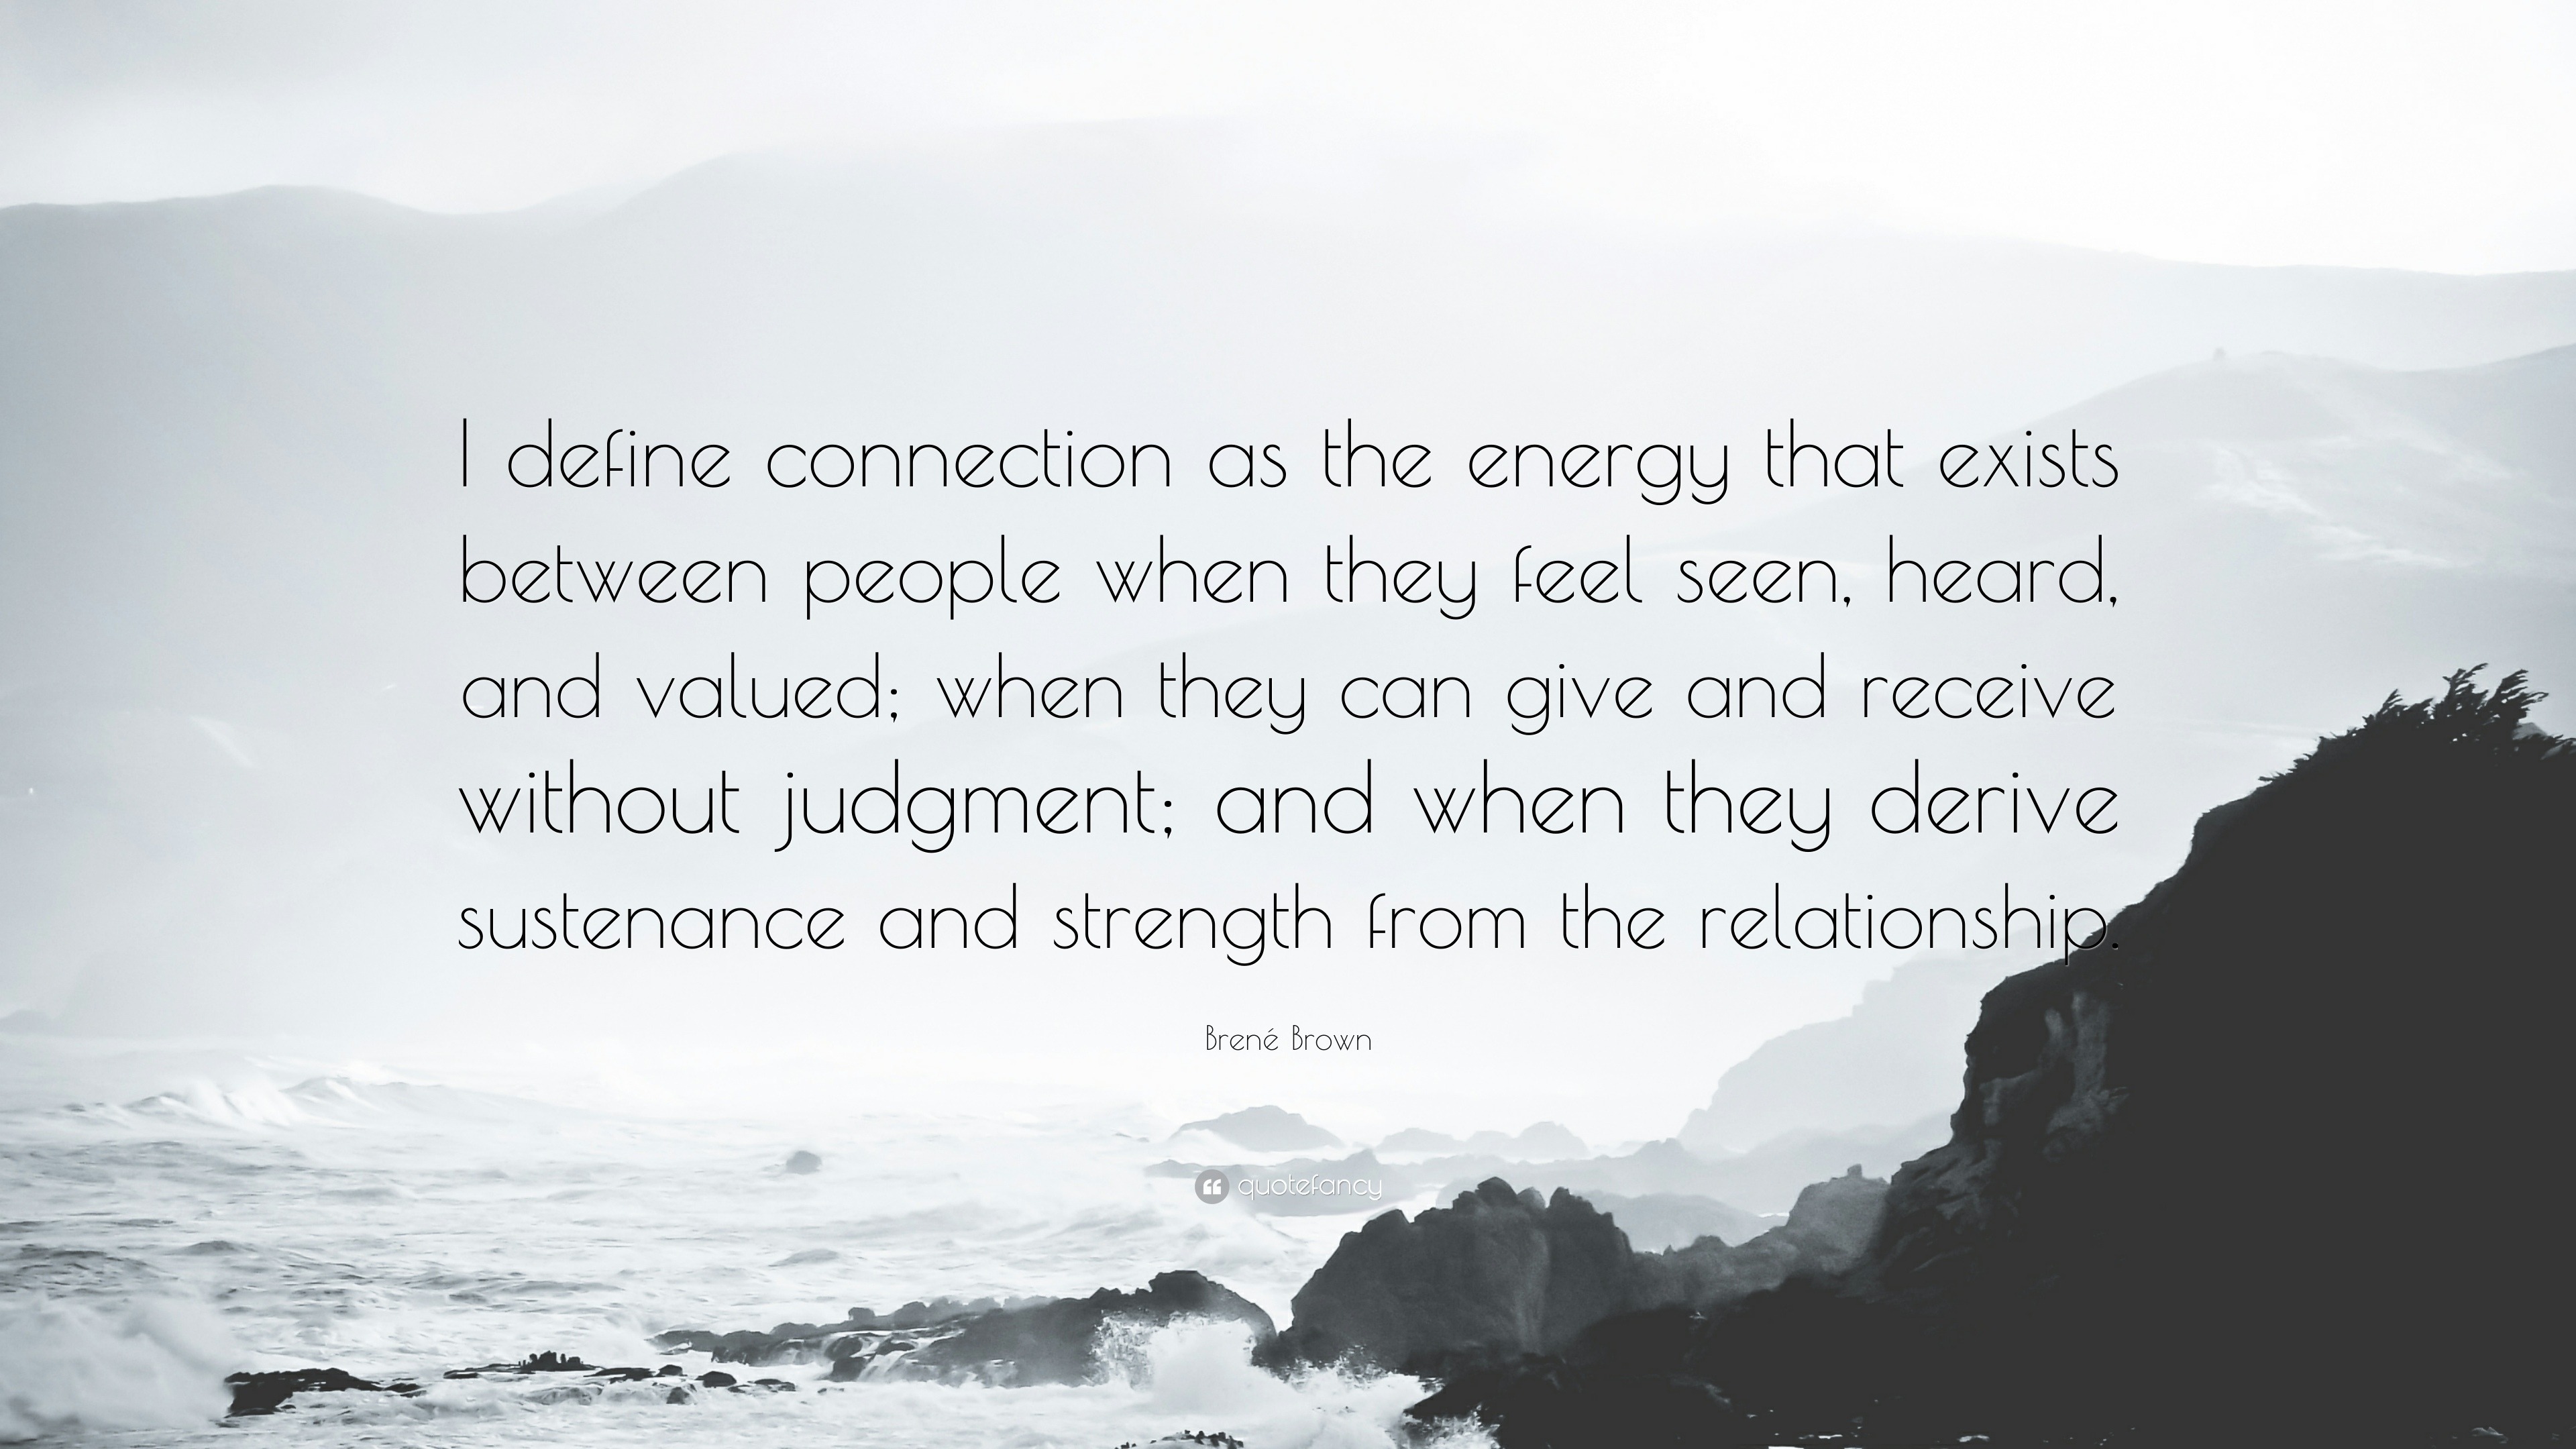 Brené Brown Quote “I define connection as the energy that